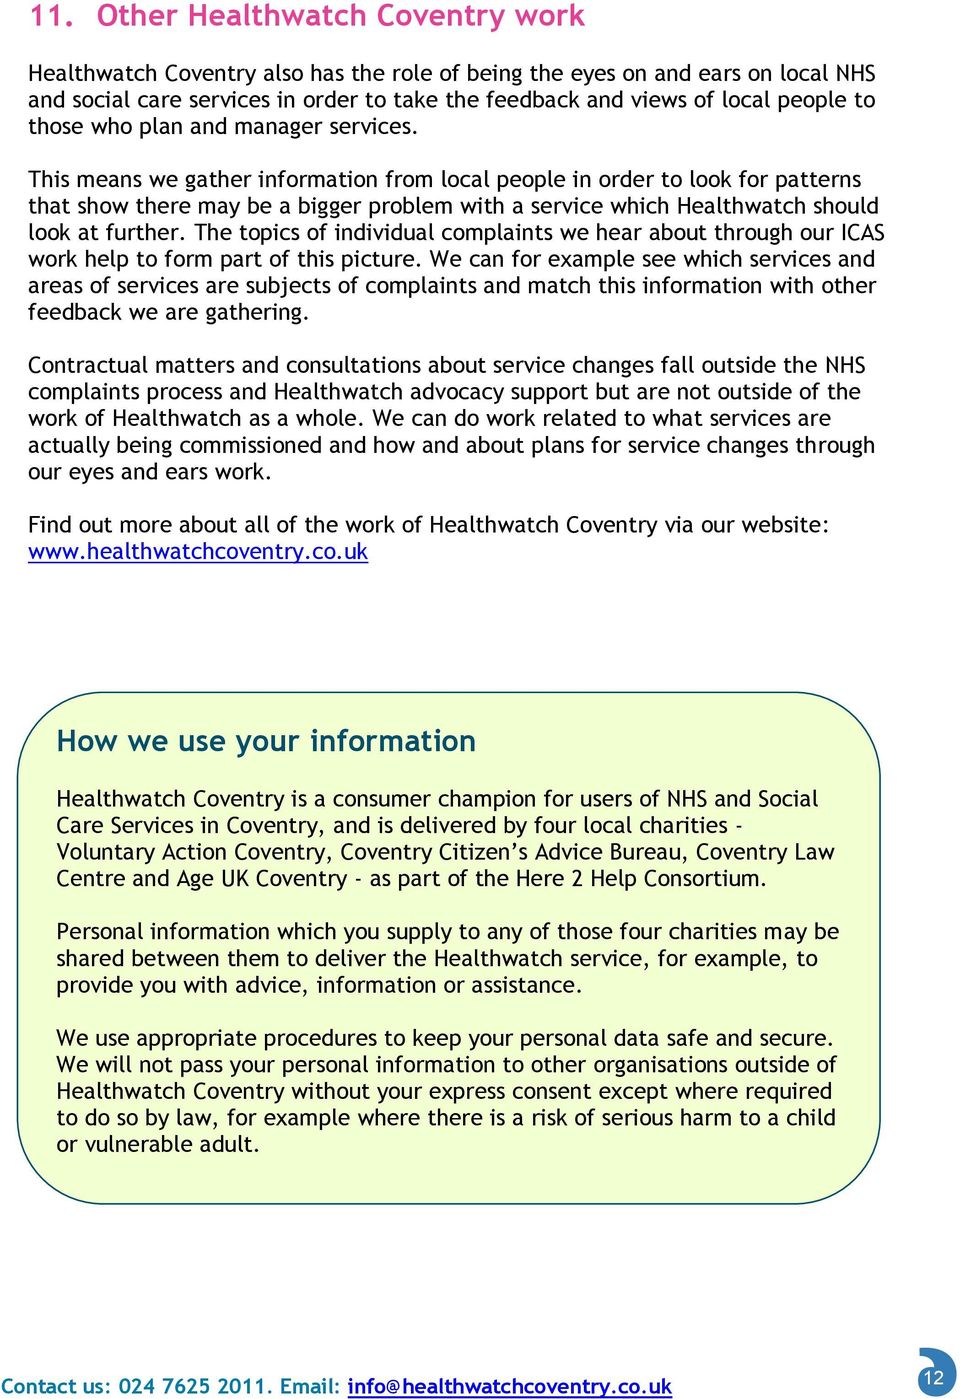 This means we gather information from local people in order to look for patterns that show there may be a bigger problem with a service which Healthwatch should look at further.